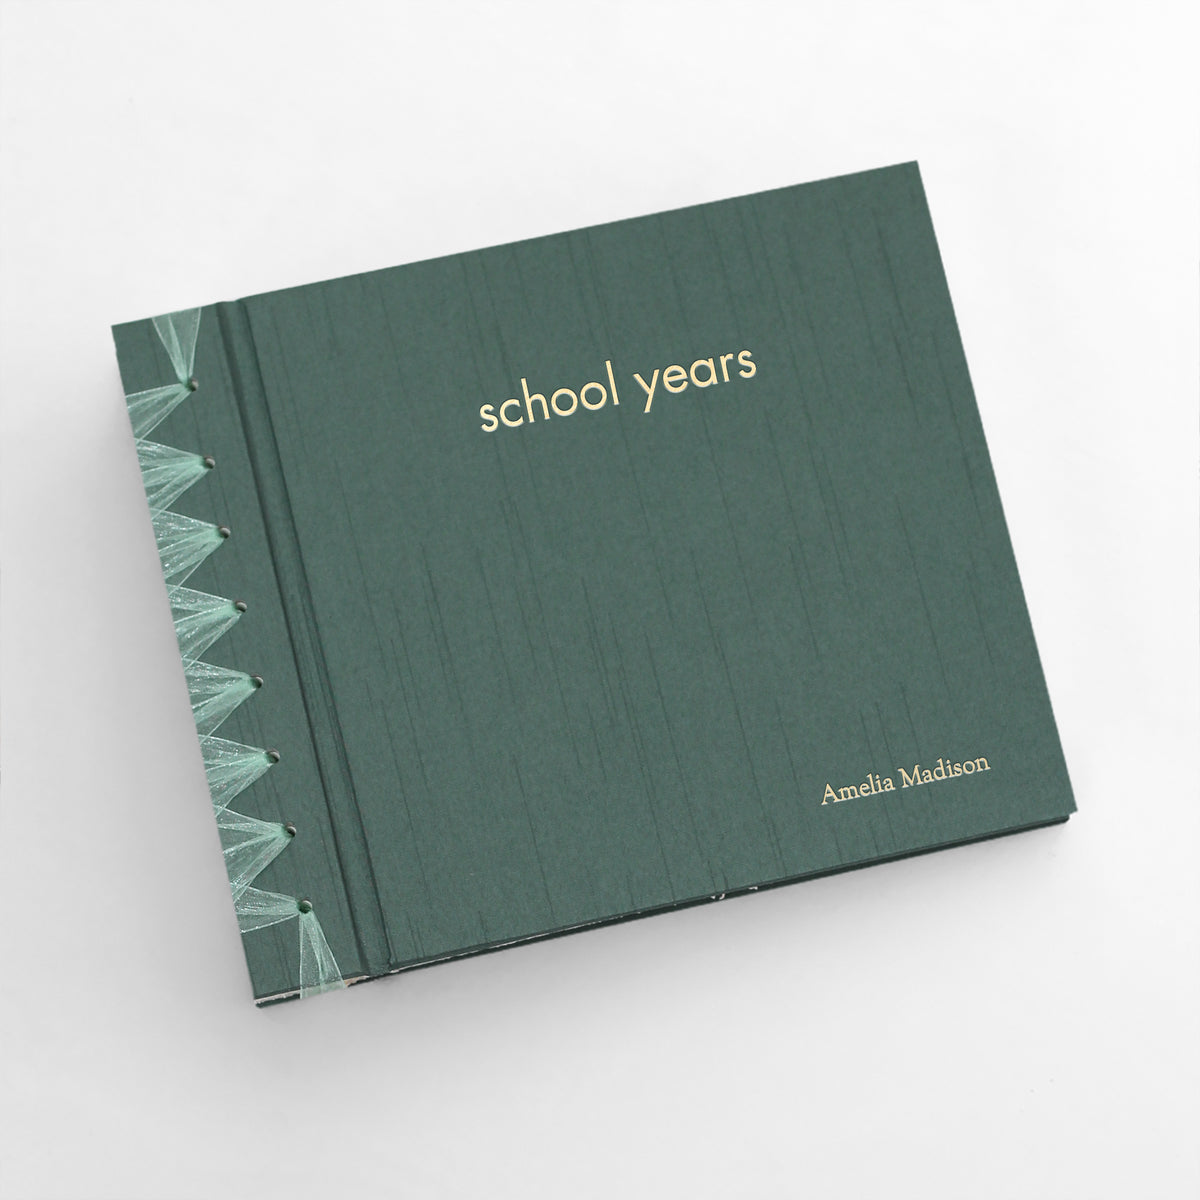 School Years with Jade Silk Cover